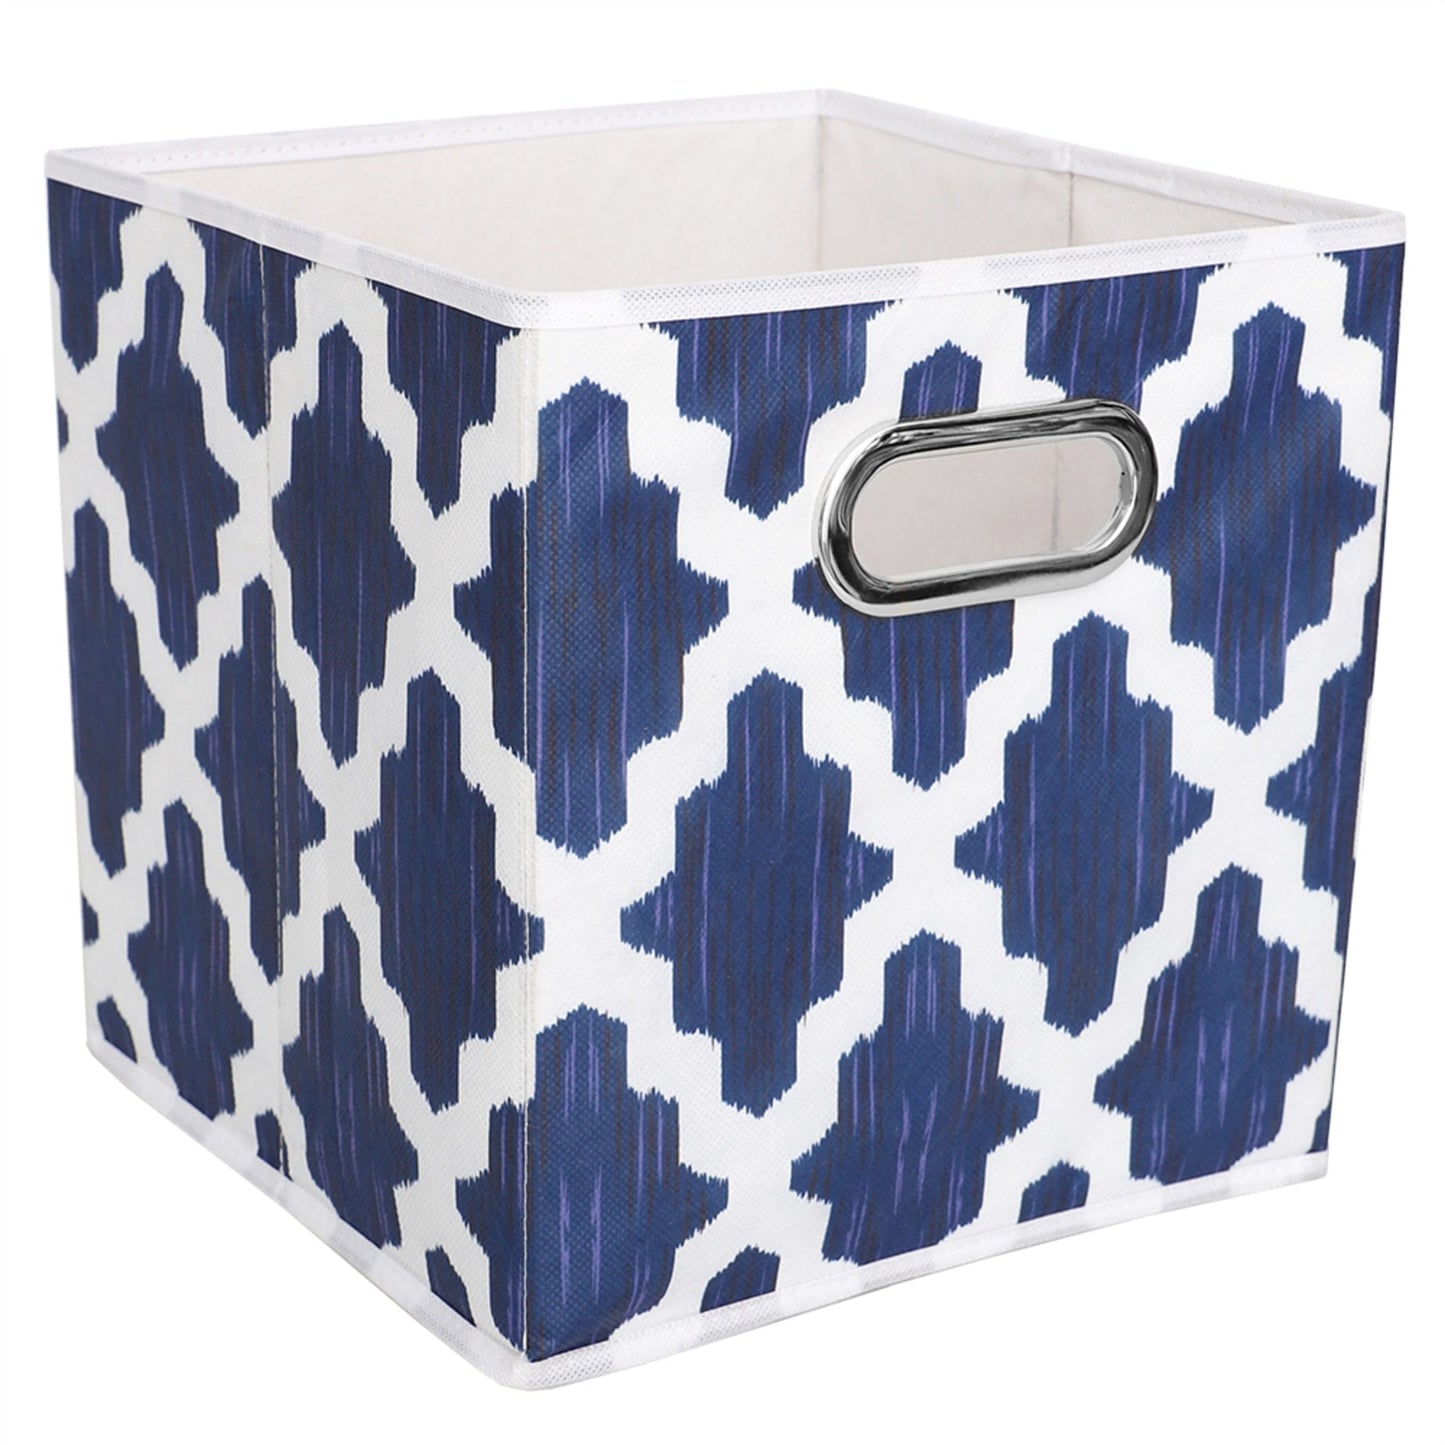 Lattice Collapsible Non-Woven Storage Bin with Grommet Handle, Navy